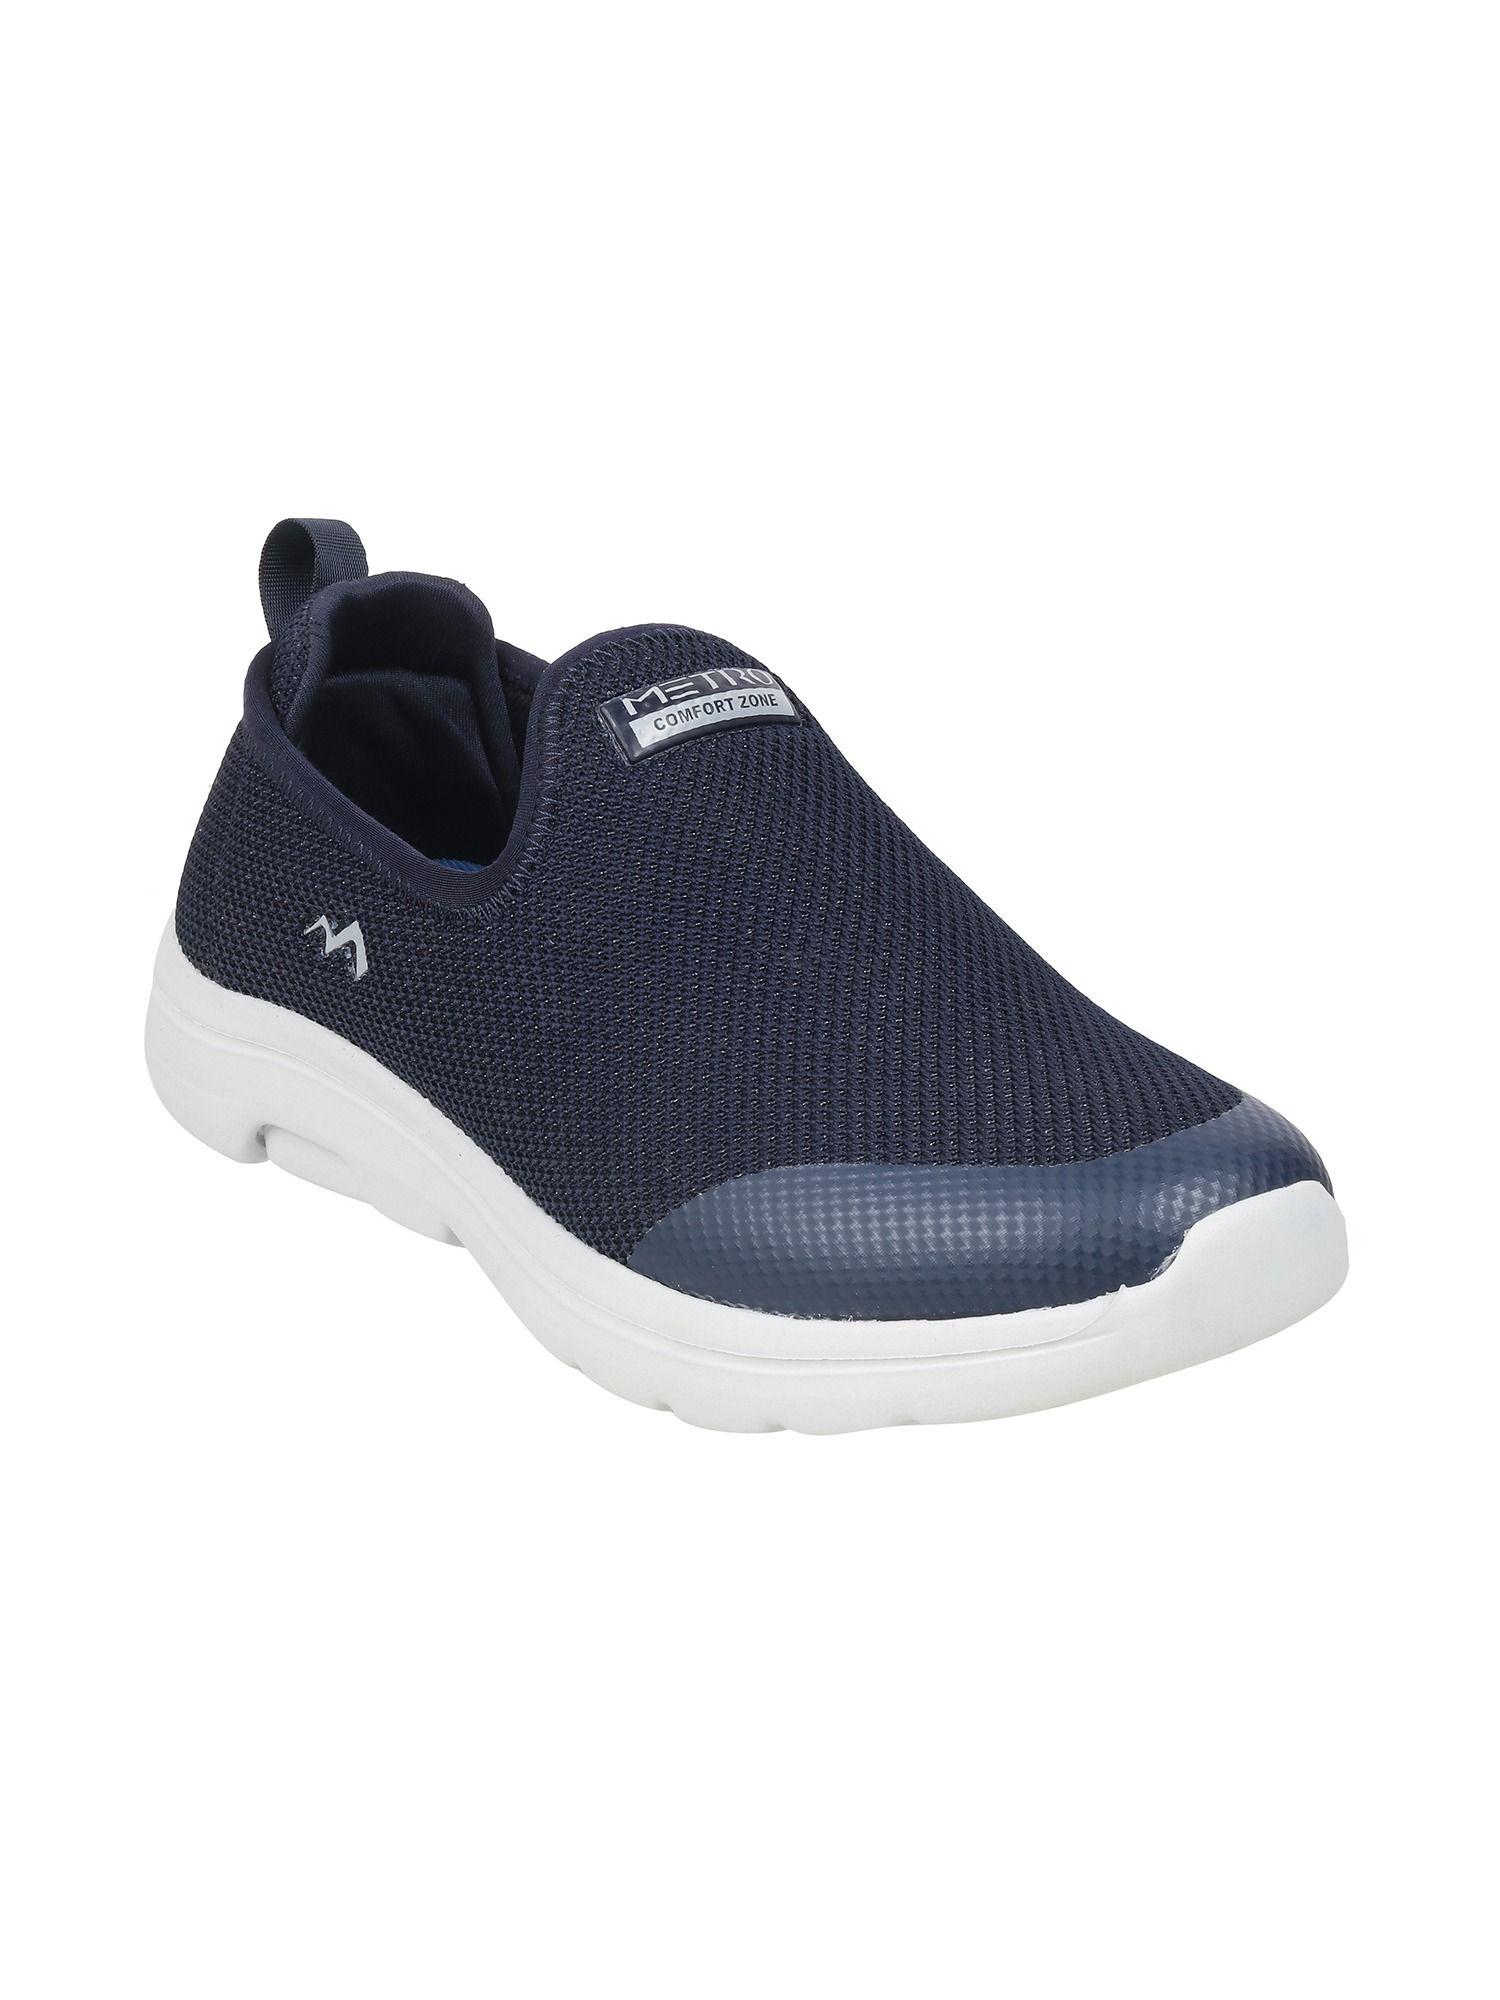 woven blue-navy sneakers